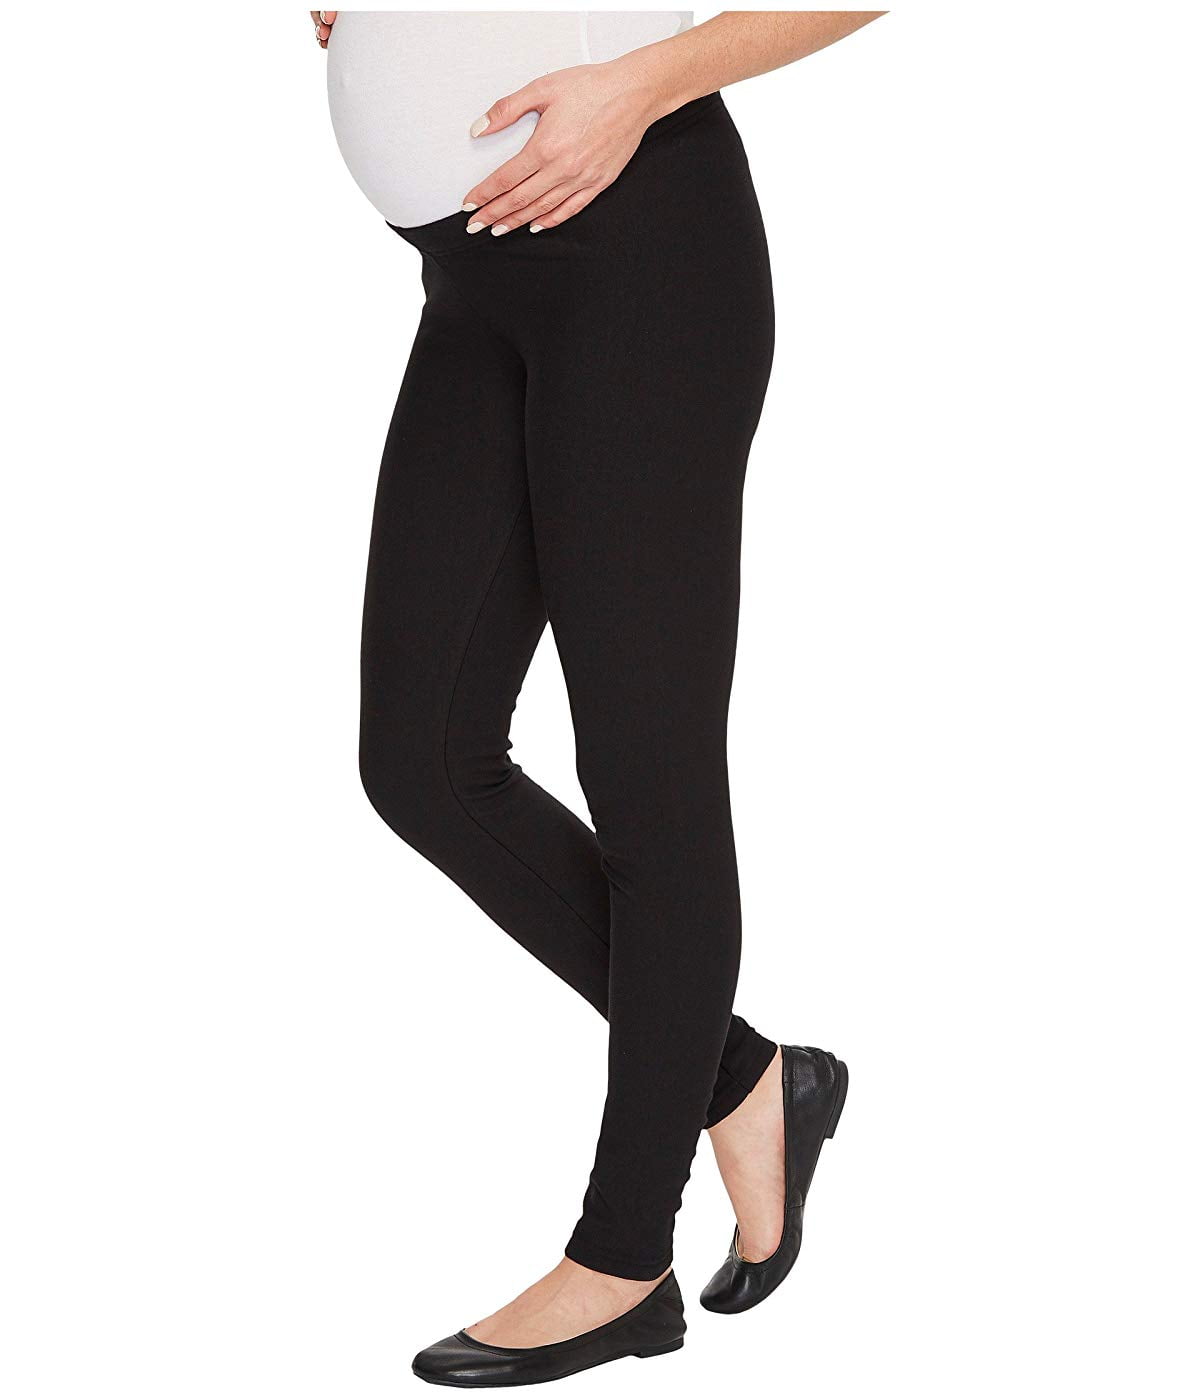 Taqqpue Women's Maternity Fleece Lined Leggings Over the Belly Pregnancy  Winter Warm Thick Pregnancy Yoga Workout Pants High Waist Stretchy Thermal